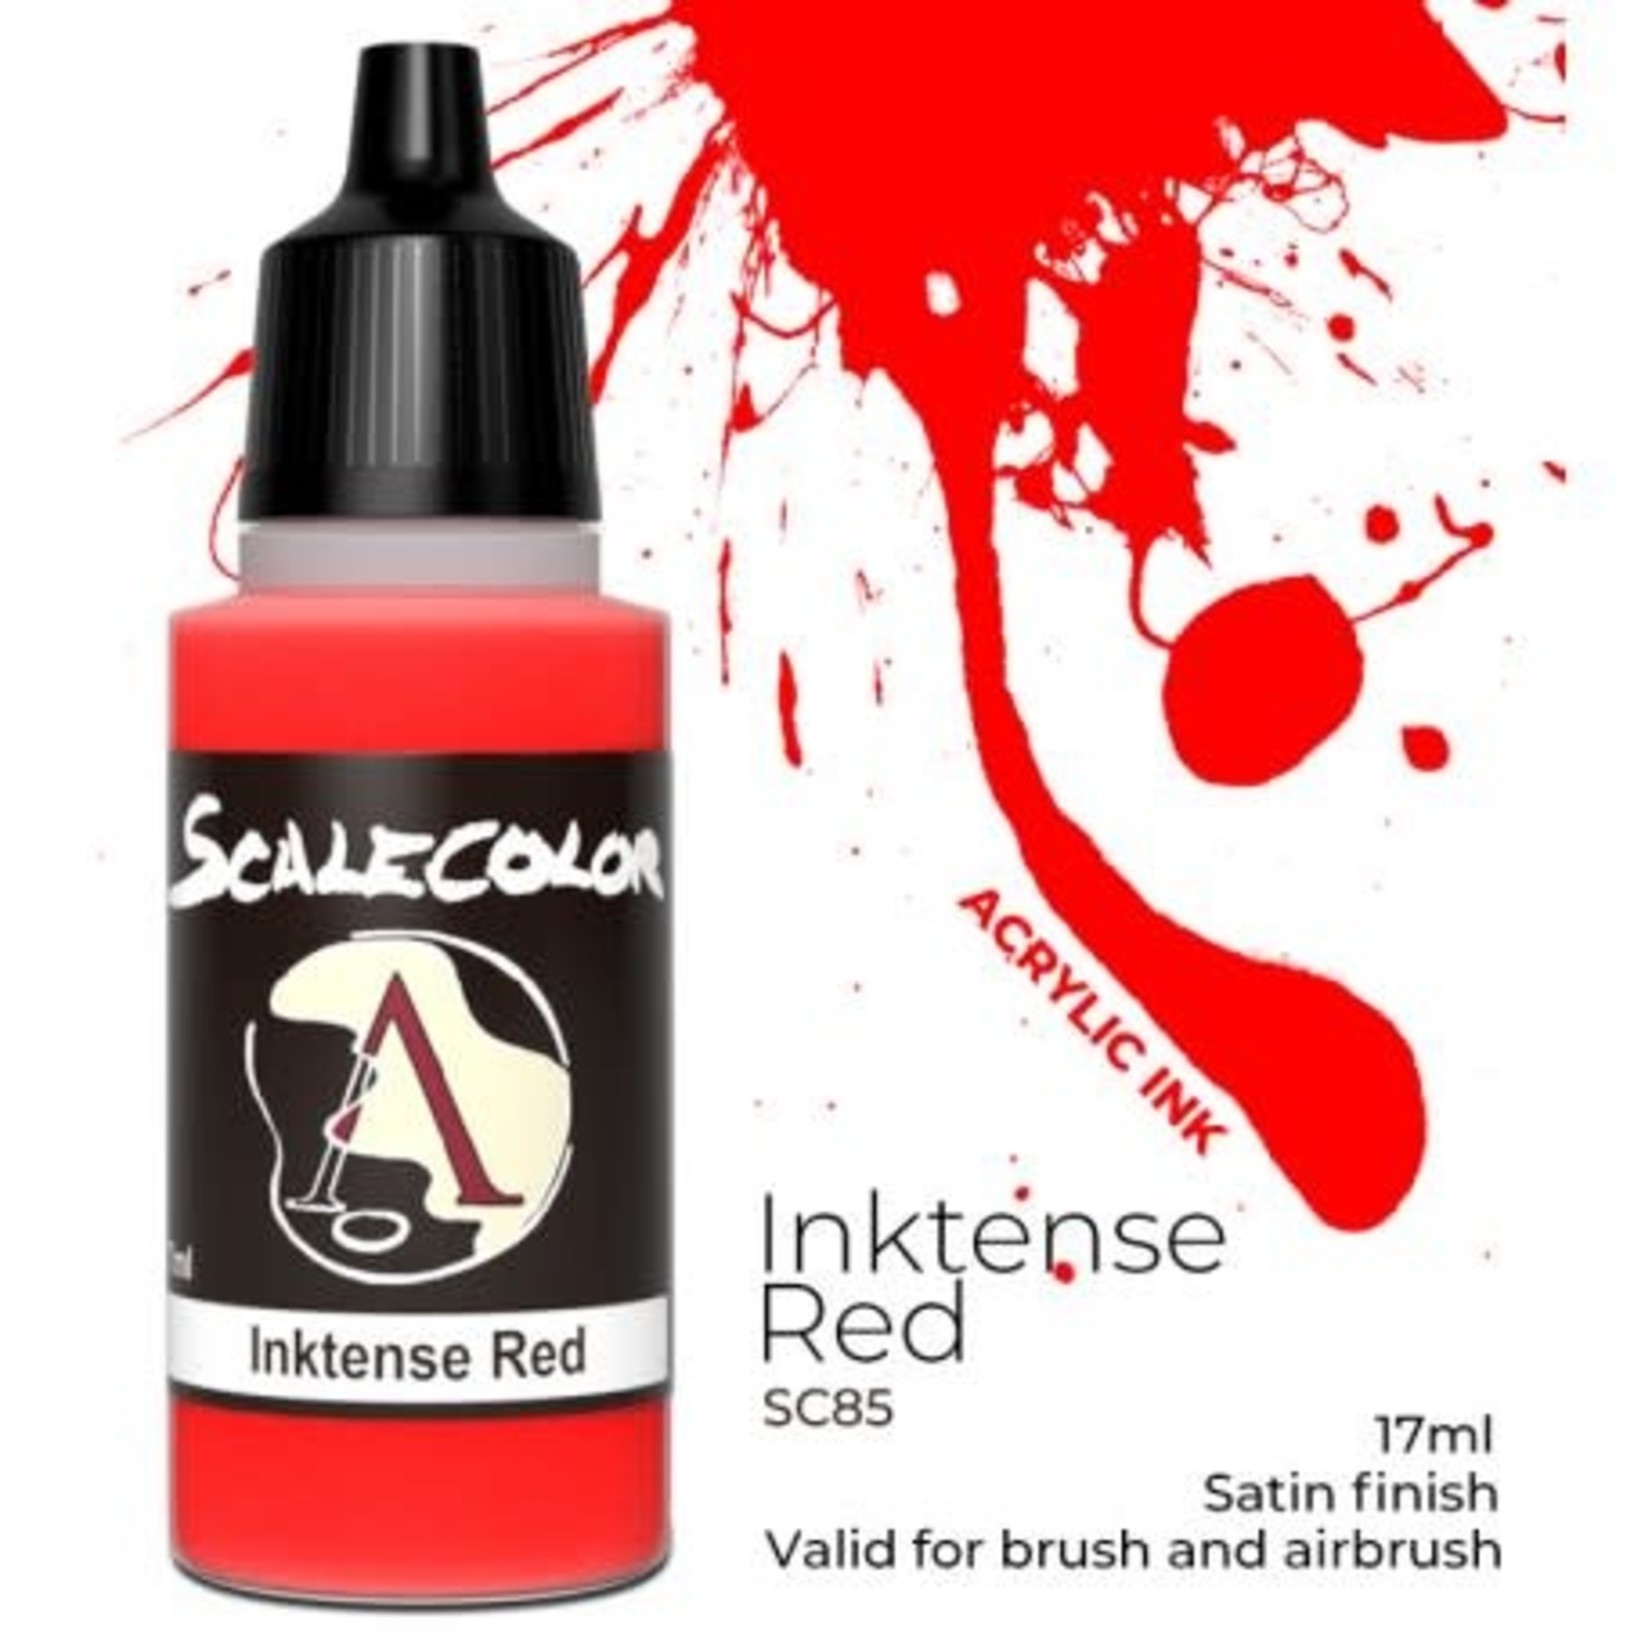 Scale 75 Scalecolor SC85 Inktense Red 17ml